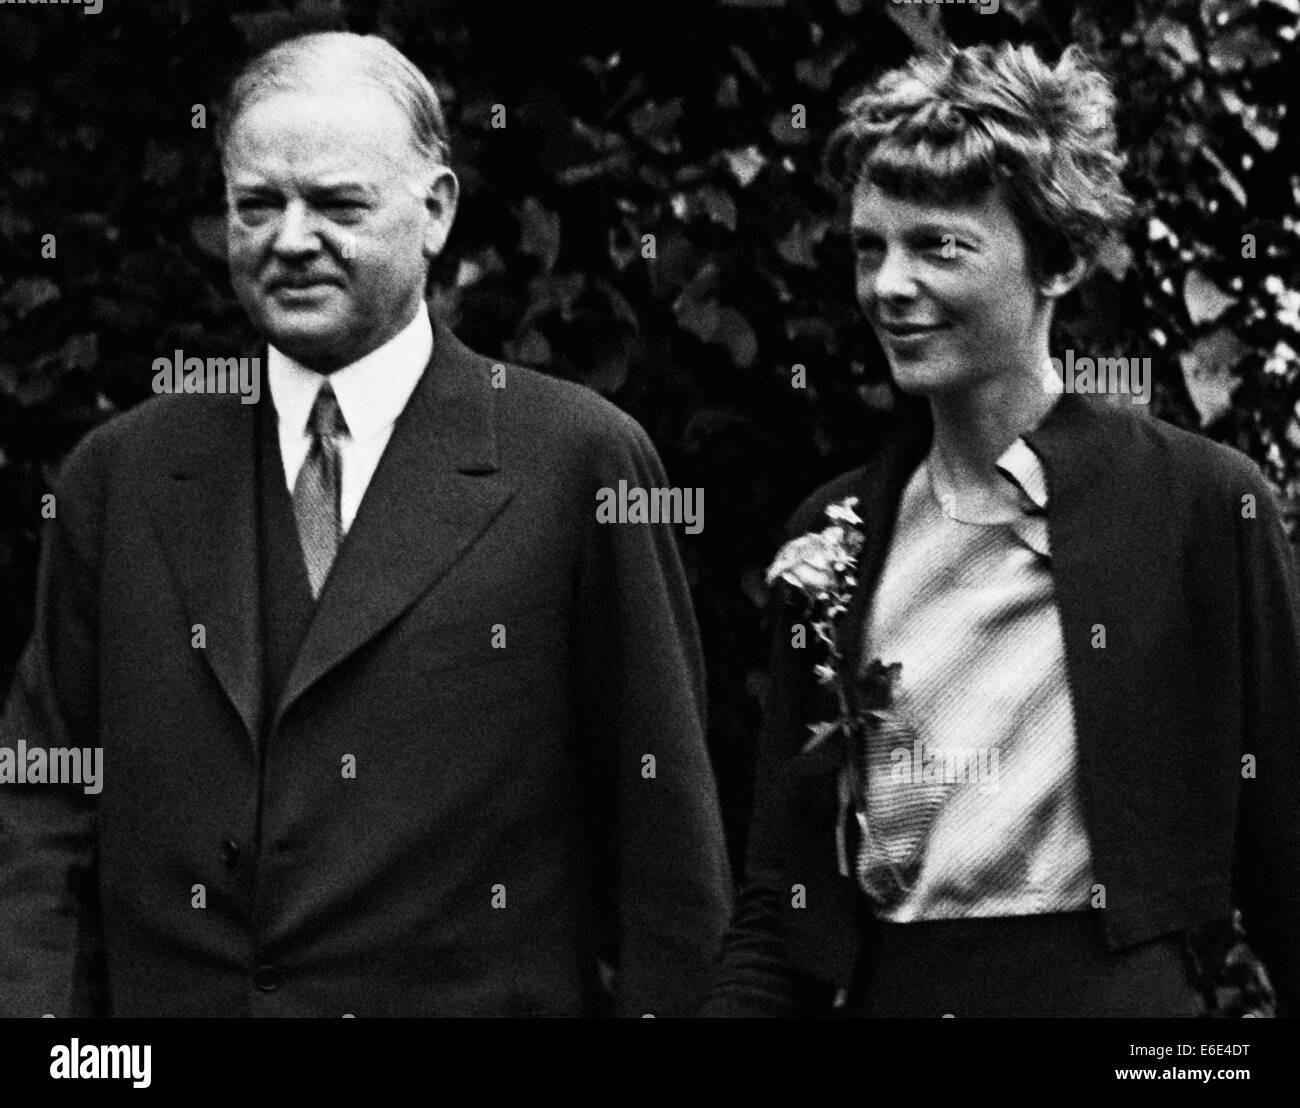 Vintage photo of American aviation pioneer and author Amelia Earhart (1897 – declared dead 1939) – Earhart and her navigator Fred Noonan famously vanished in 1937 while she was trying to become the first female to complete a circumnavigational flight of the globe. Earhart is pictured with President Herbert Hoover at The White House in June 1932 where Hoover presented her with a National Geographic Society gold medal in recognition of her non-stop solo flight across the Atlantic. Stock Photo